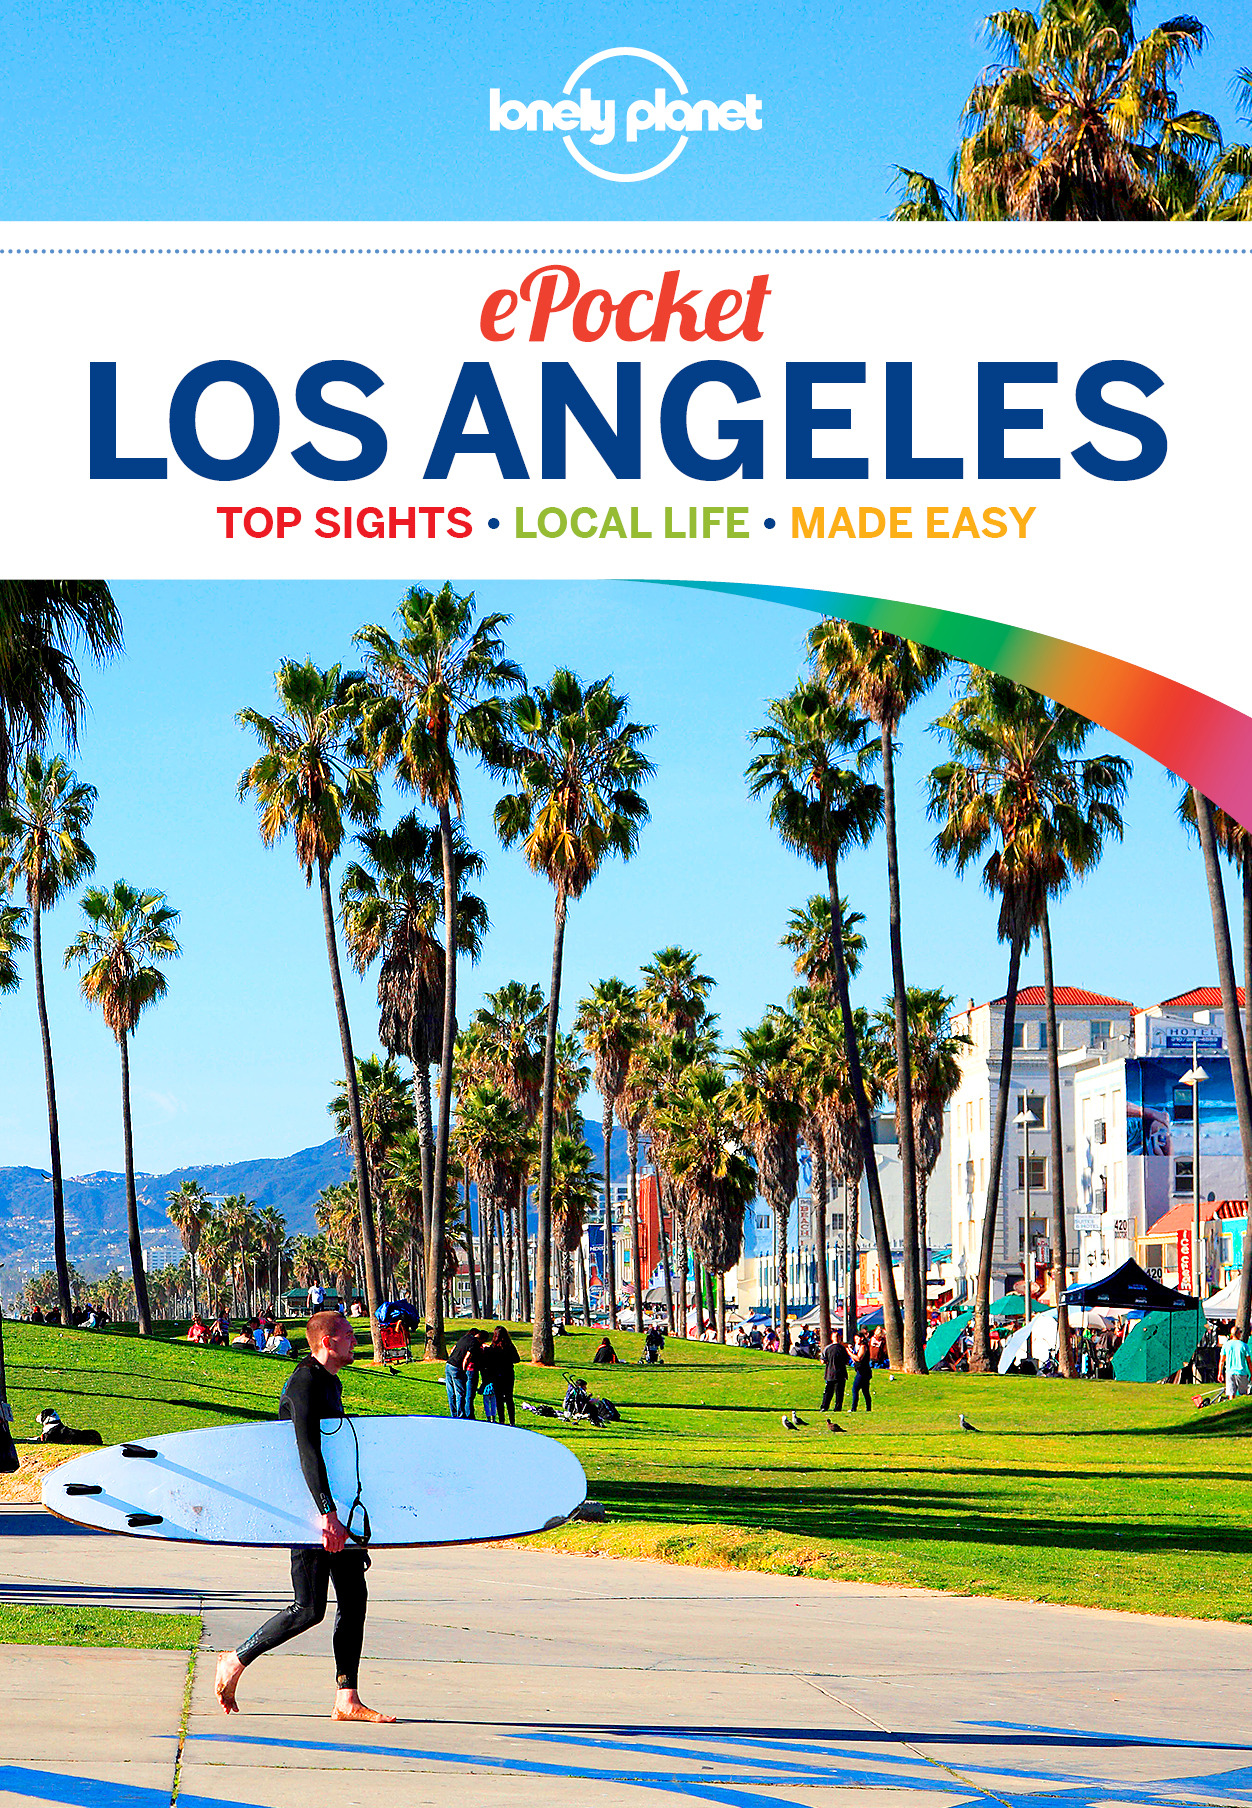 Planet, Lonely - Lonely Planet Pocket Los Angeles, ebook